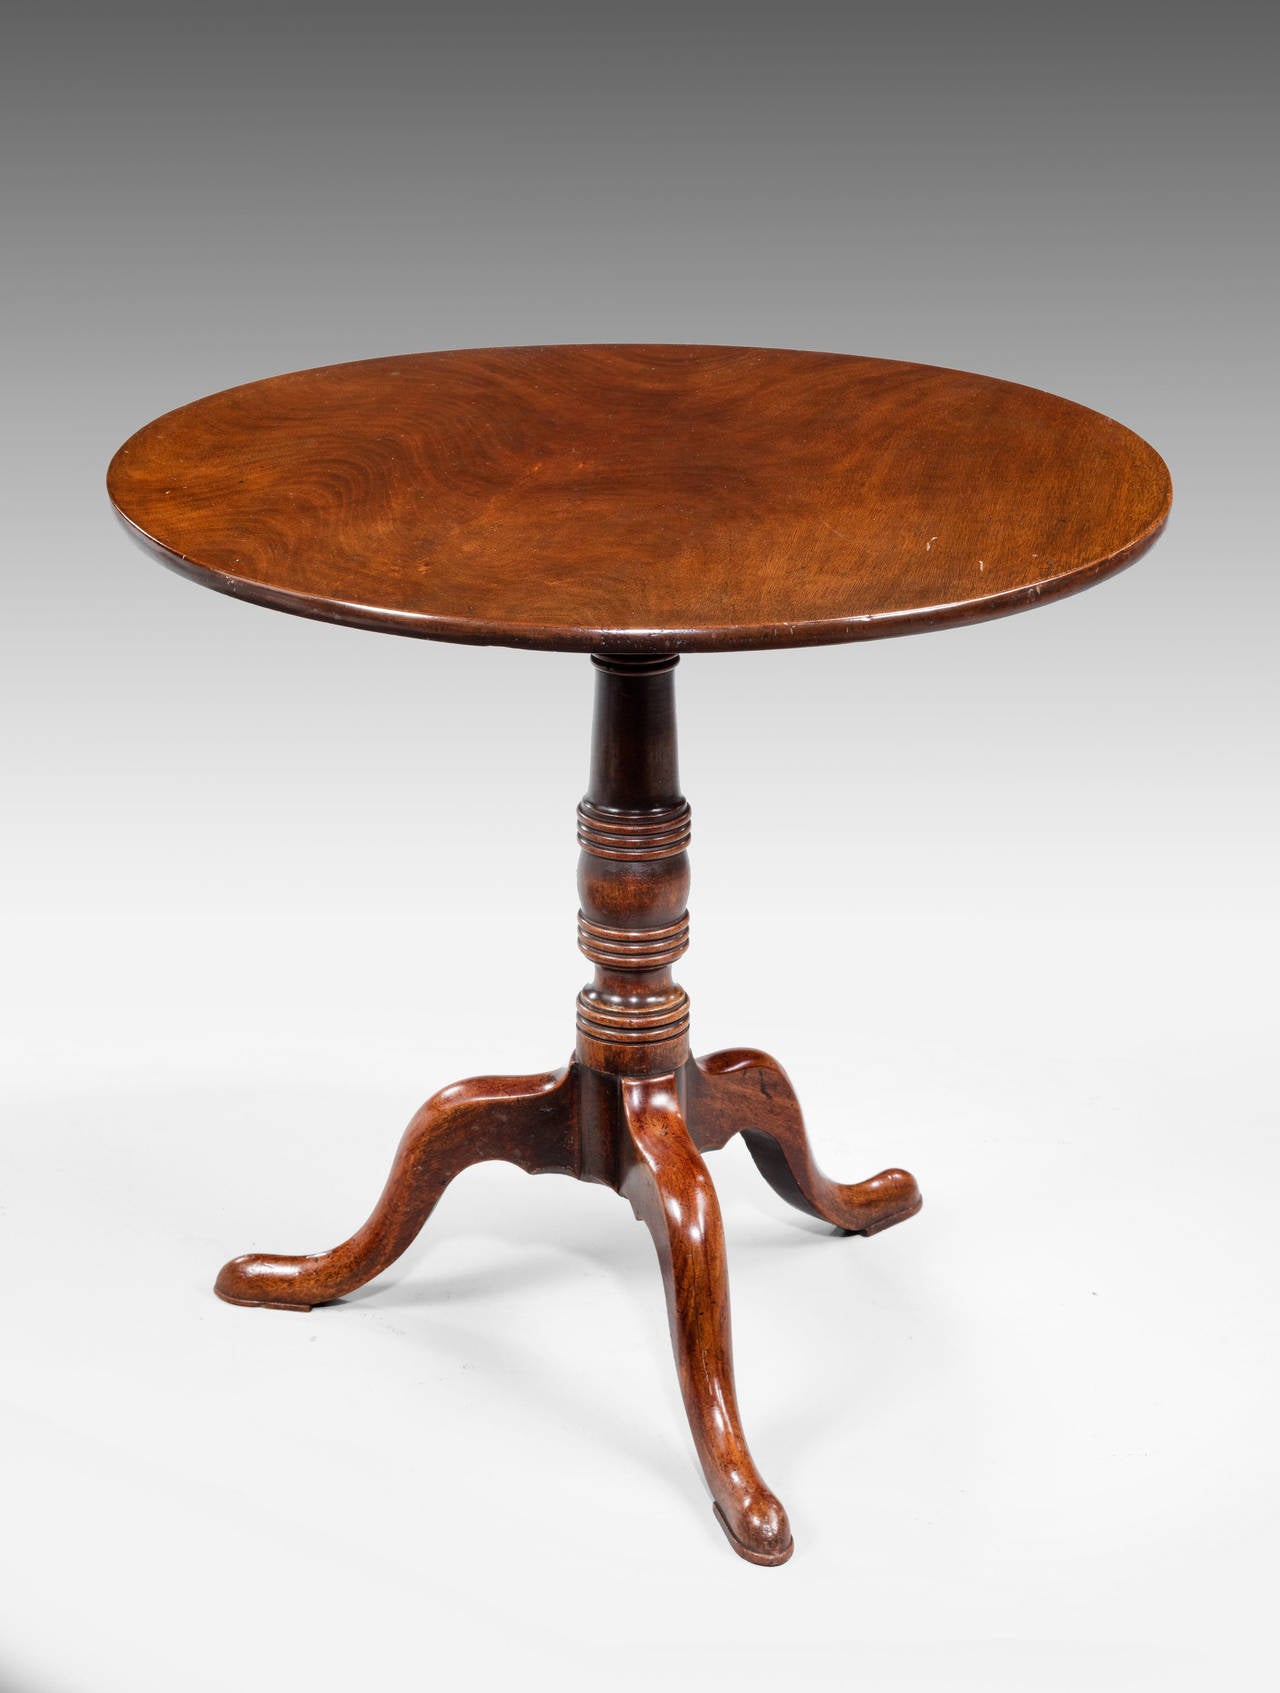 A very well figured George III Period Mahogany Tilt Table, the central support with writhen sections, the top of very good colour and well figured.

RR